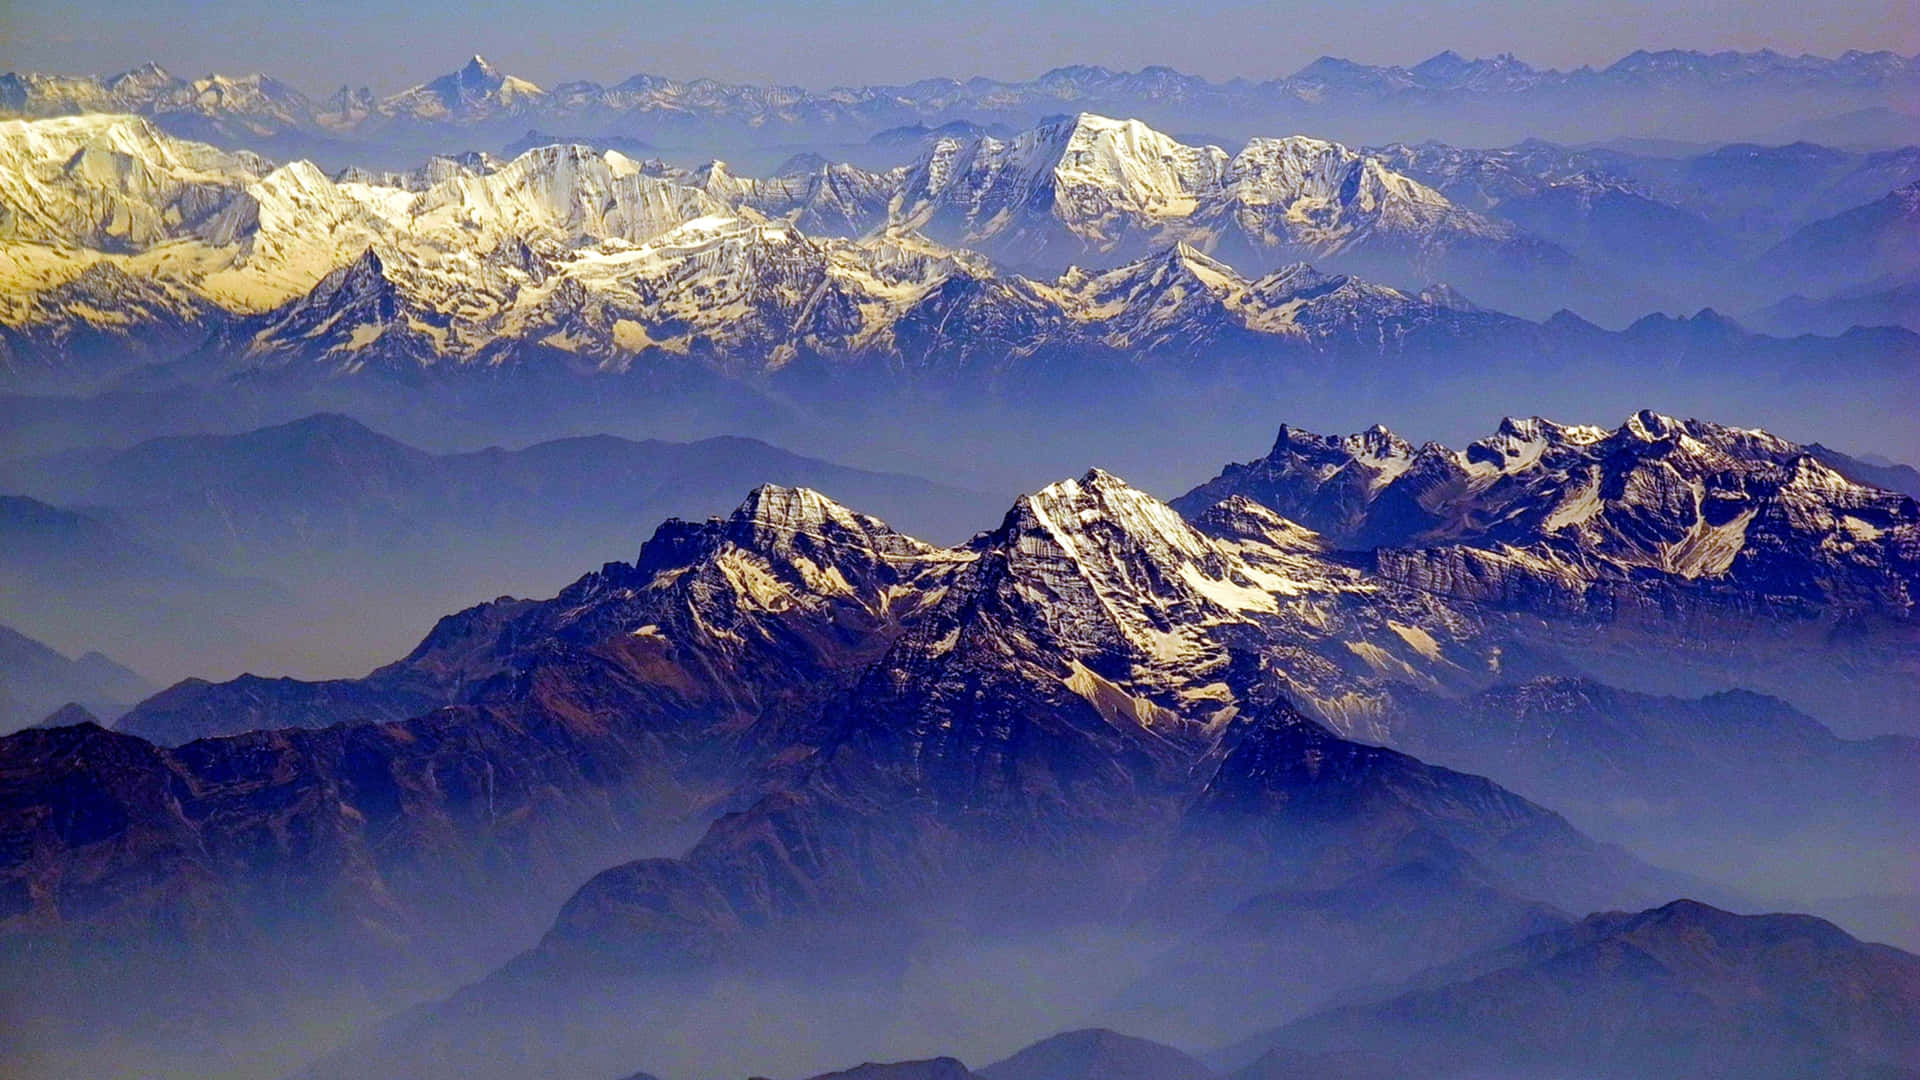 Admiring the majestic beauty of the Himalayas